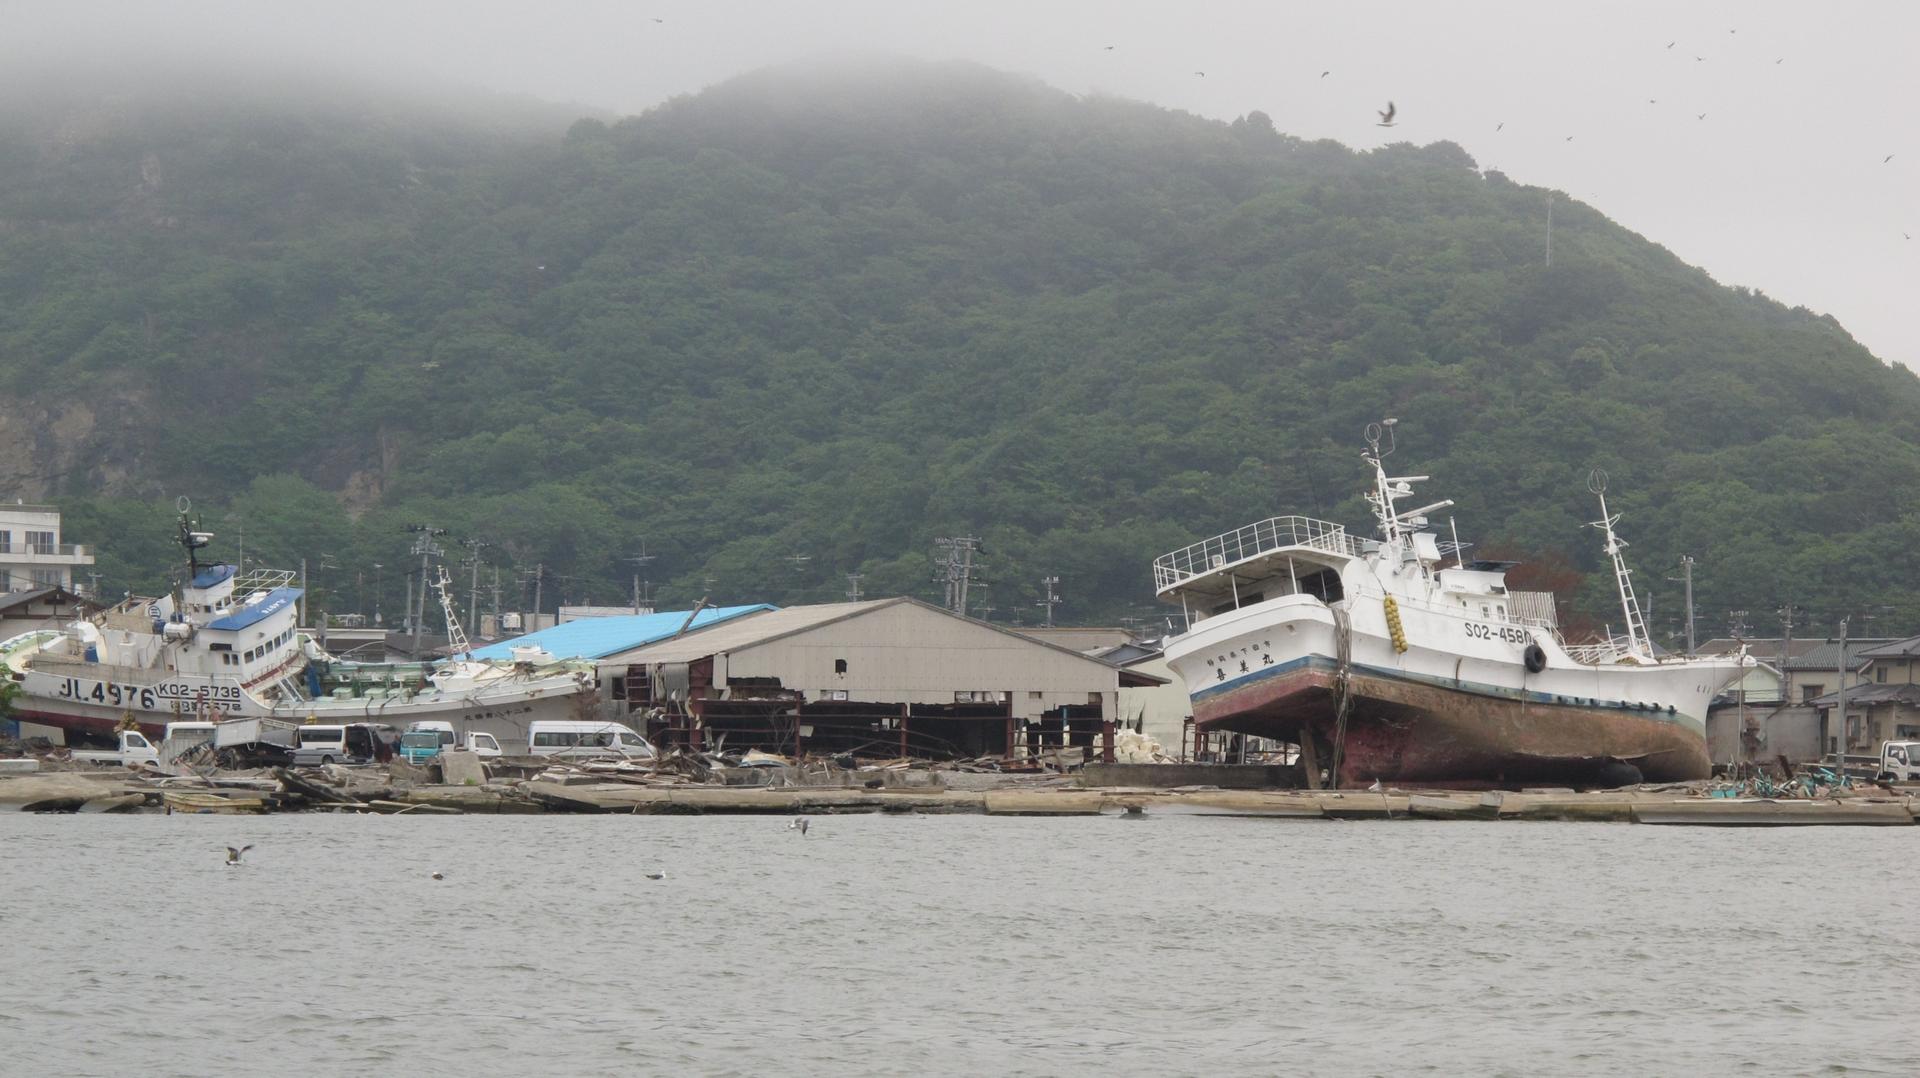 Several large boats are shown on their side and washed ashore following a tsunami as shown from across a body of water.